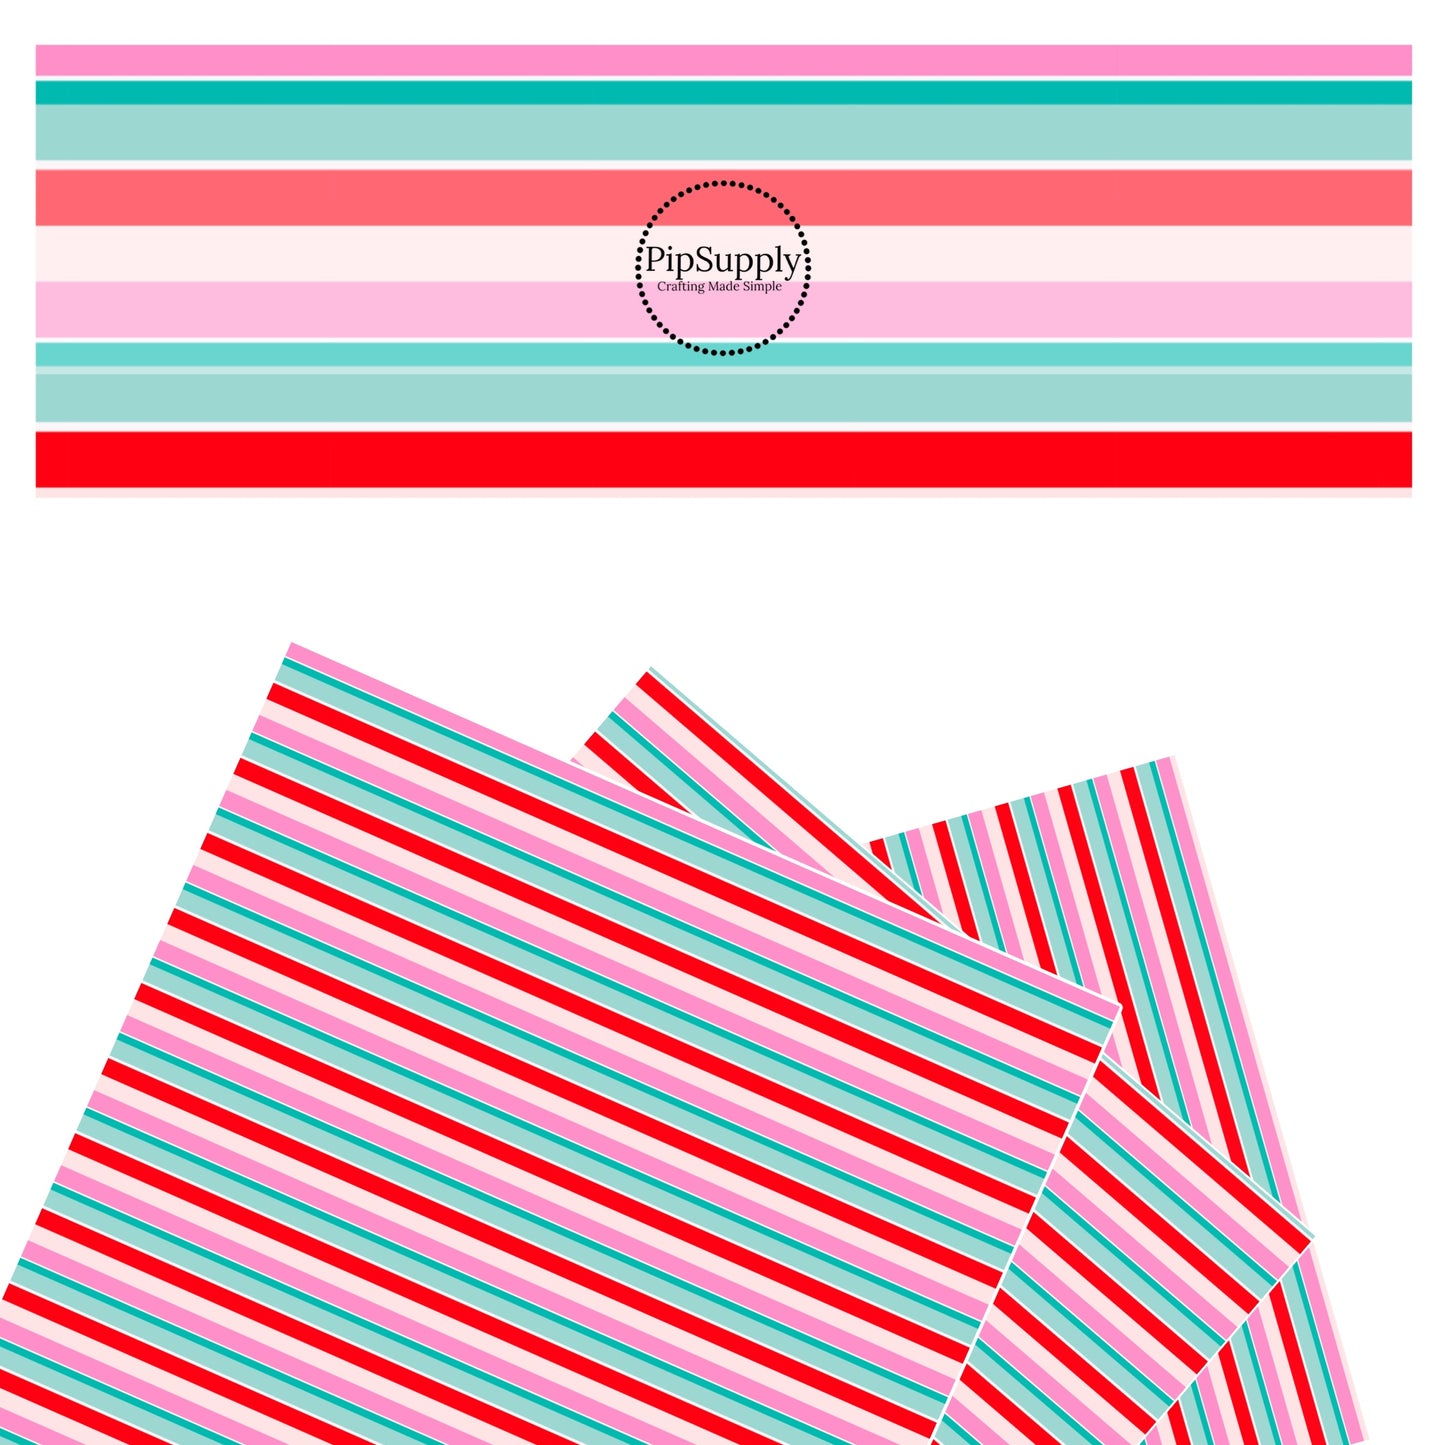 These holiday themed faux leather sheets contain the following design elements: light pink, white, teal, and red stripes. Our CPSIA compliant faux leather sheets or rolls can be used for all types of crafting projects.